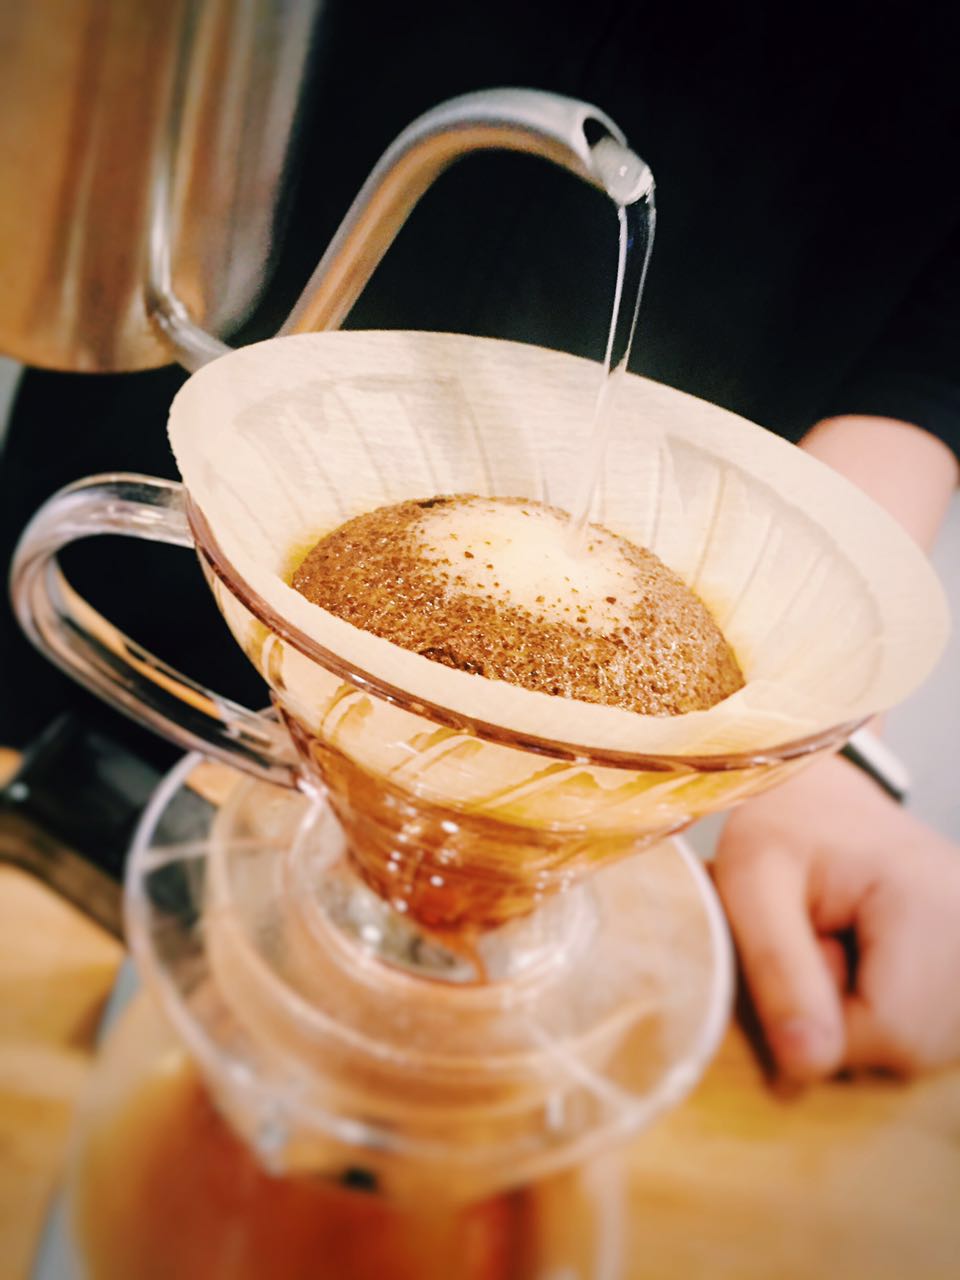 Meitu | the wonderful moment of hand-made coffee was completely fascinated by the beauty of hand-made coffee.